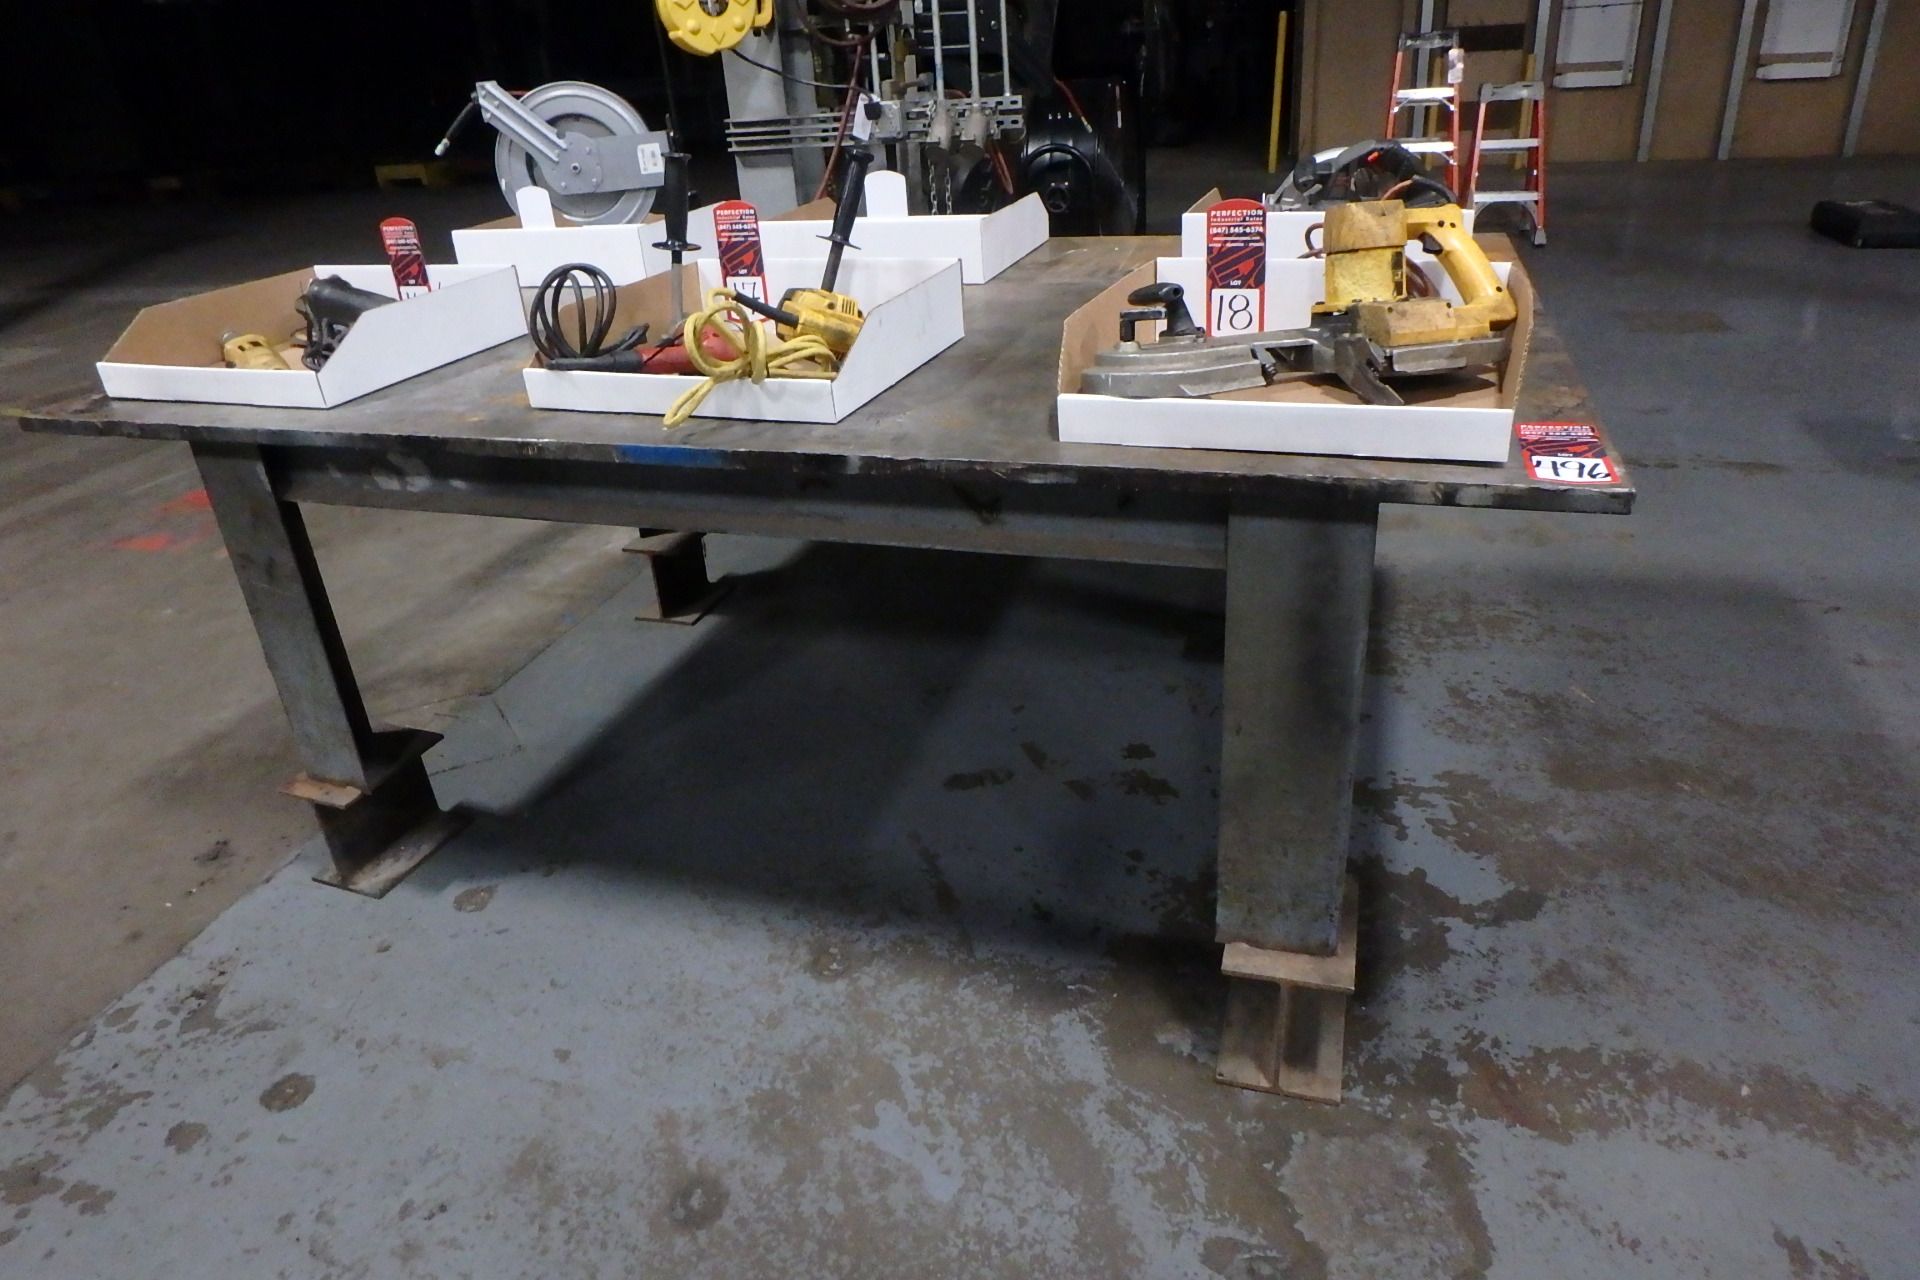 35" x 57" x 85-1/2" x 1" Metal Welding Table, (Contents Not Included)